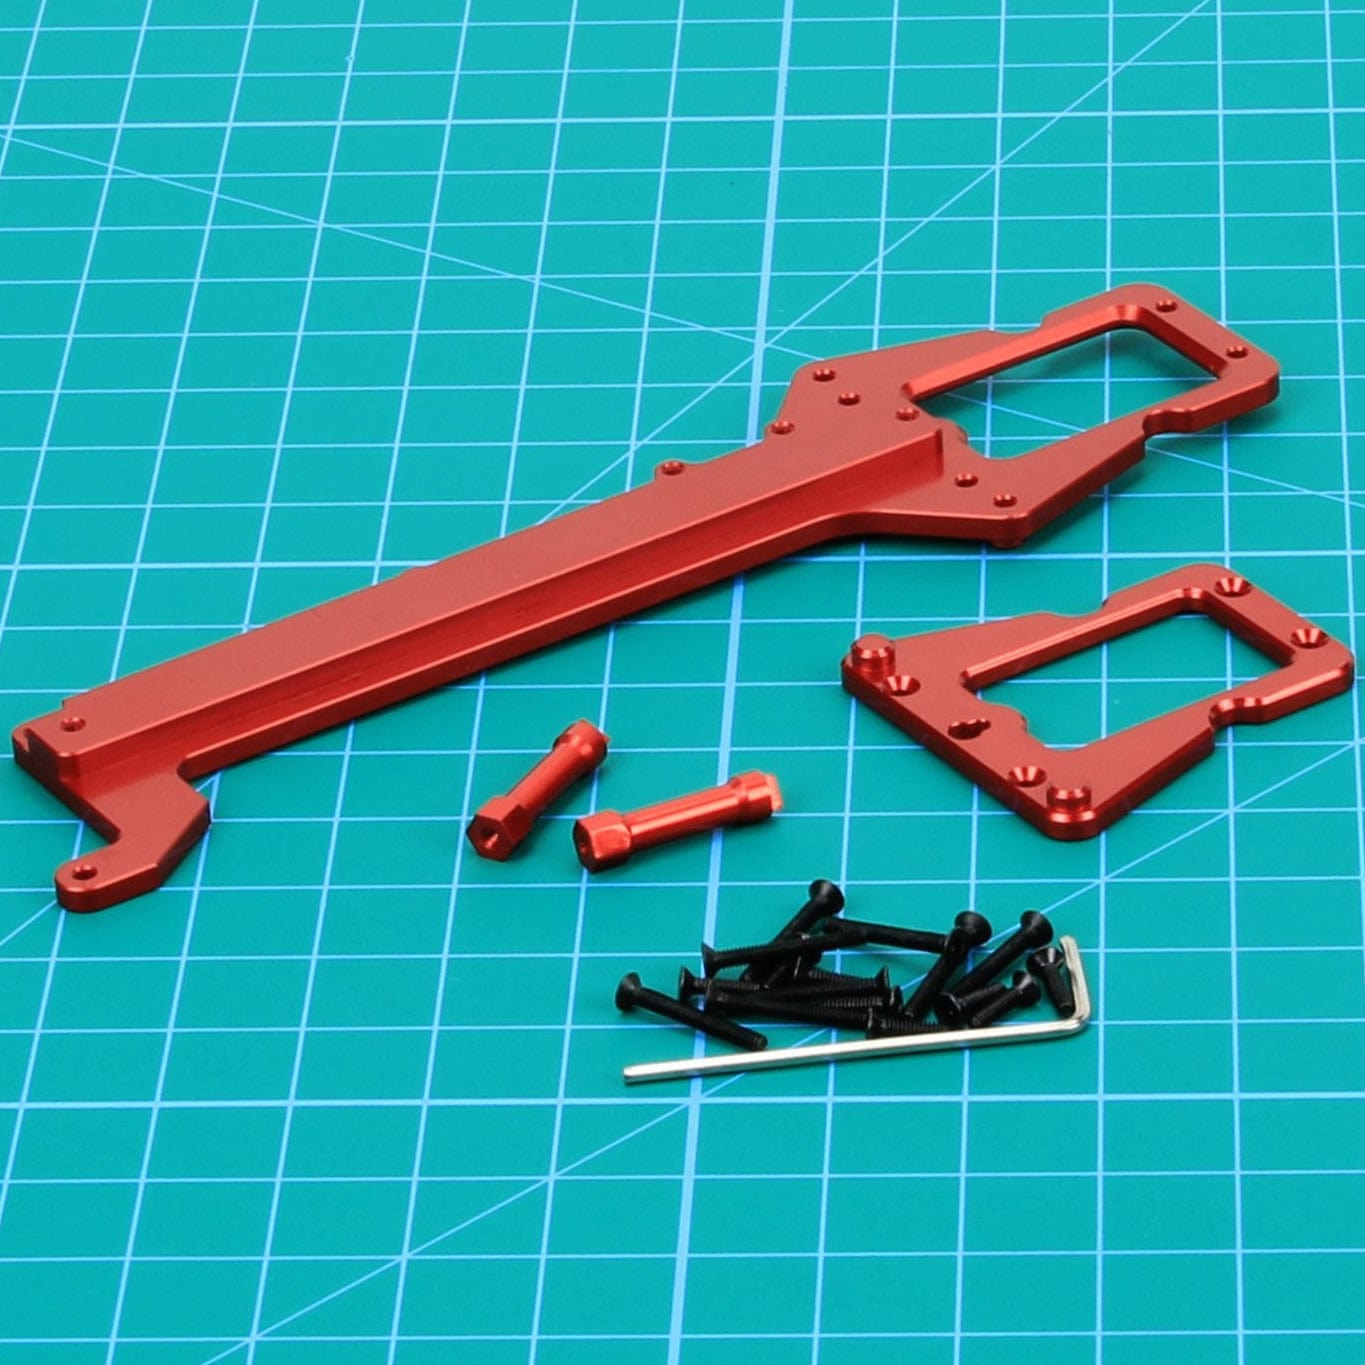 RCAWD TRAXXAS UPGRADE PARTS Red RCAWD Aluminum Upper Chassis for 1/18 Traxxas Latrax Upgrades